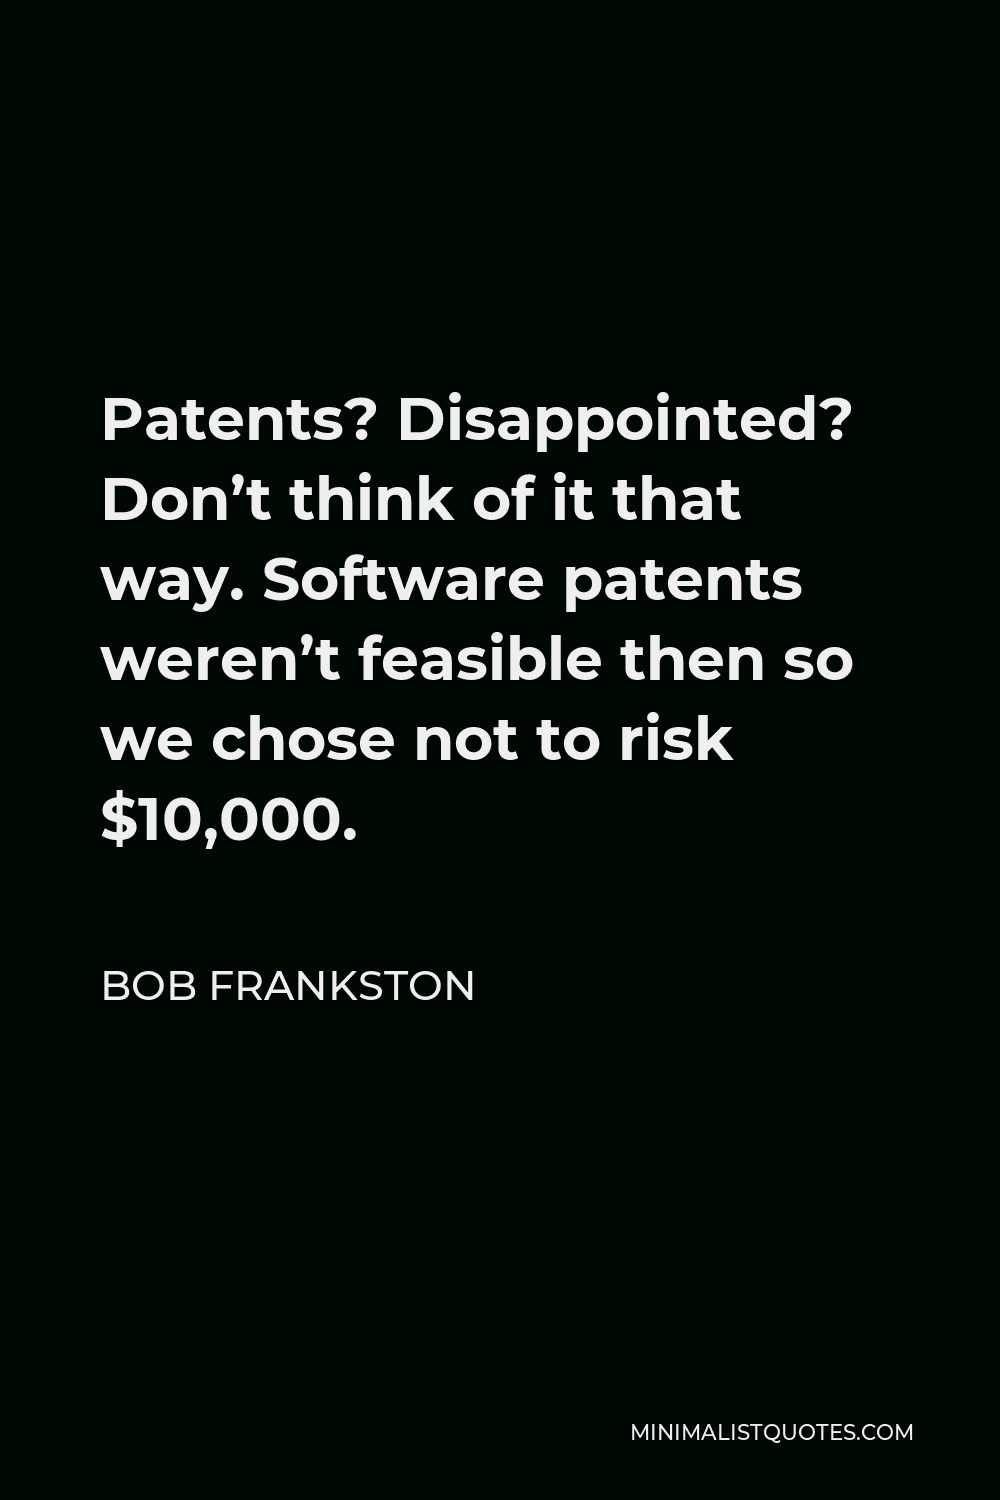 Bob Frankston Quote - Patents? Disappointed? Don’t think of it that way. Software patents weren’t feasible then so we chose not to risk $10,000.